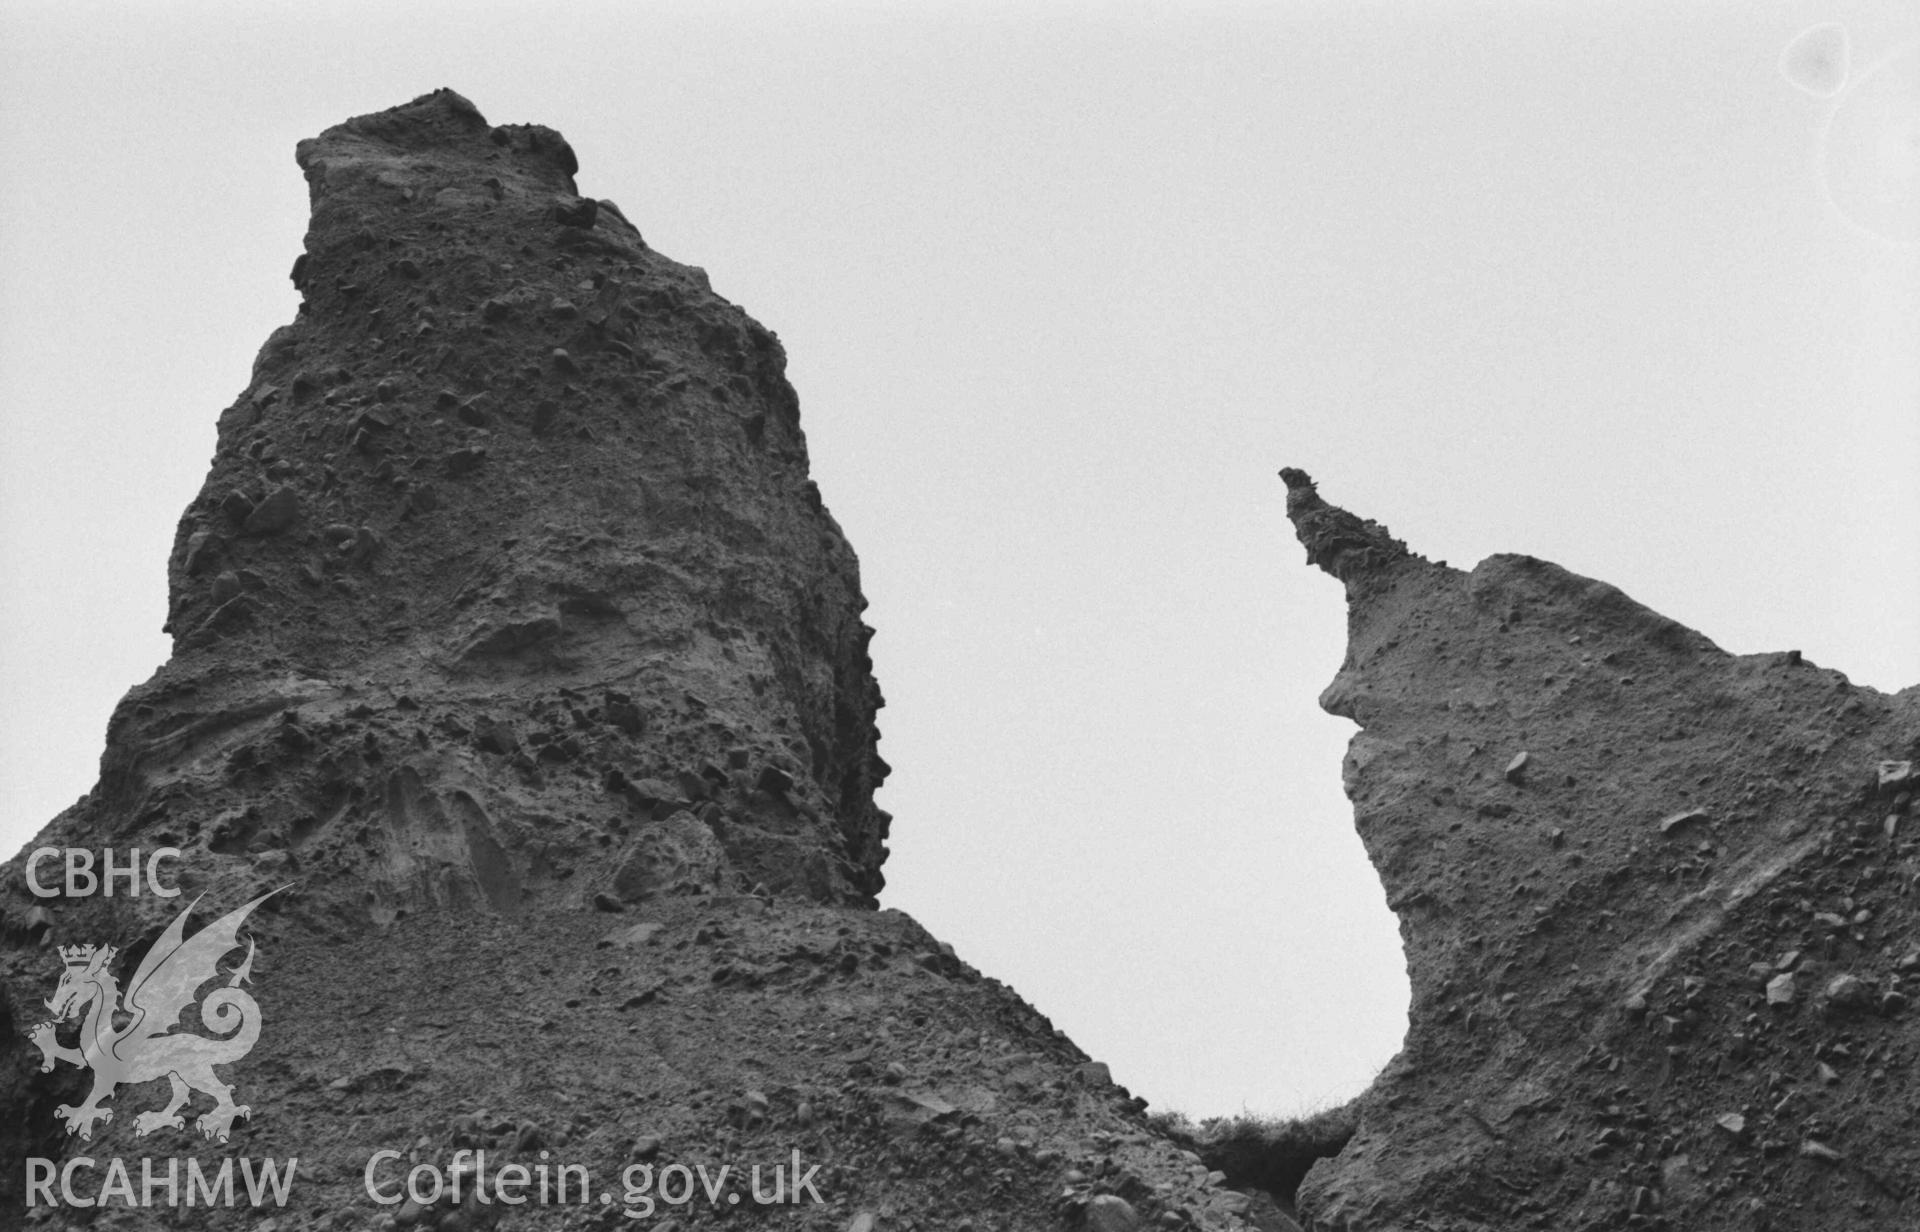 Digital copy of a black and white negative showing eroded boulder clay cliffs 100m north east of the mouth of the Afon Cwinten. Photographed by Arthur Chater on 3 January 1969. Looking south east from Grid Reference SN 436 614.